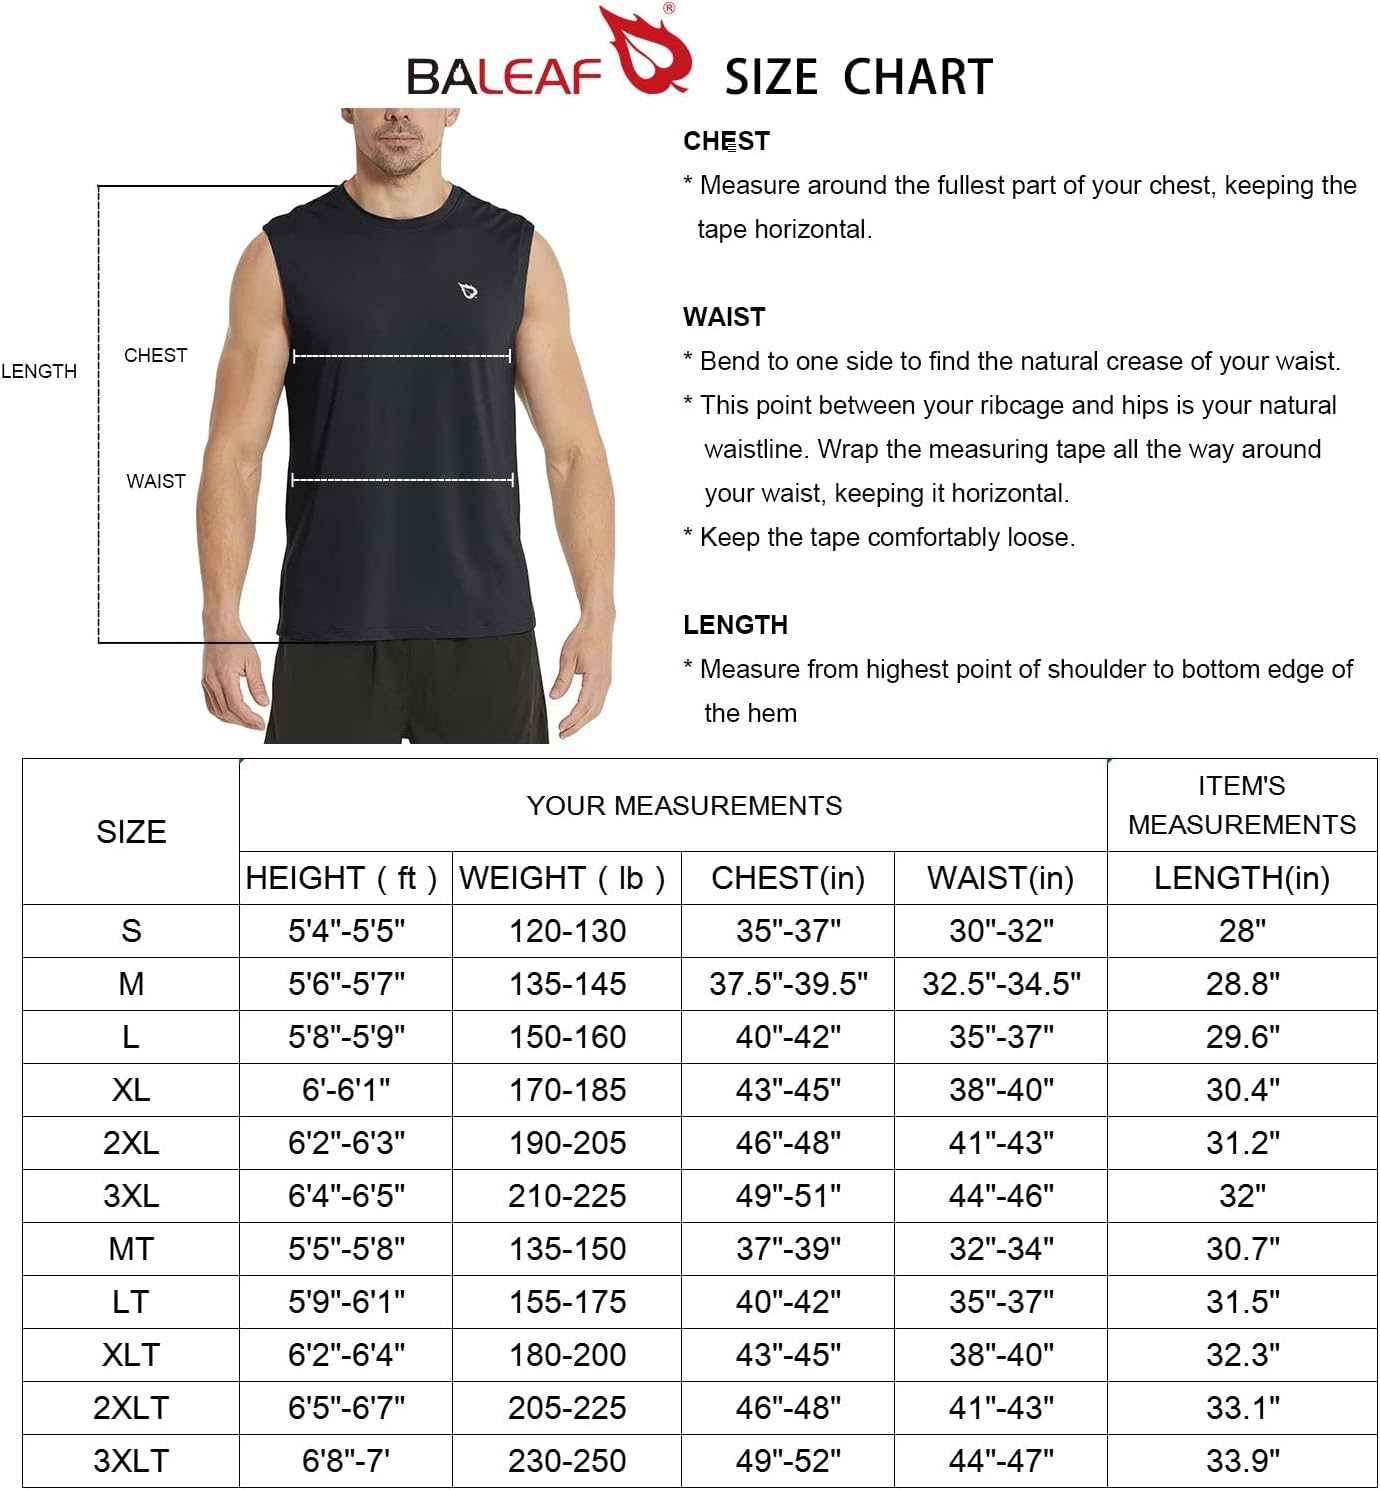 Men's Tank Tops Sleeveless Shirts Gym Workout Running Athletic Quick Dry Tech